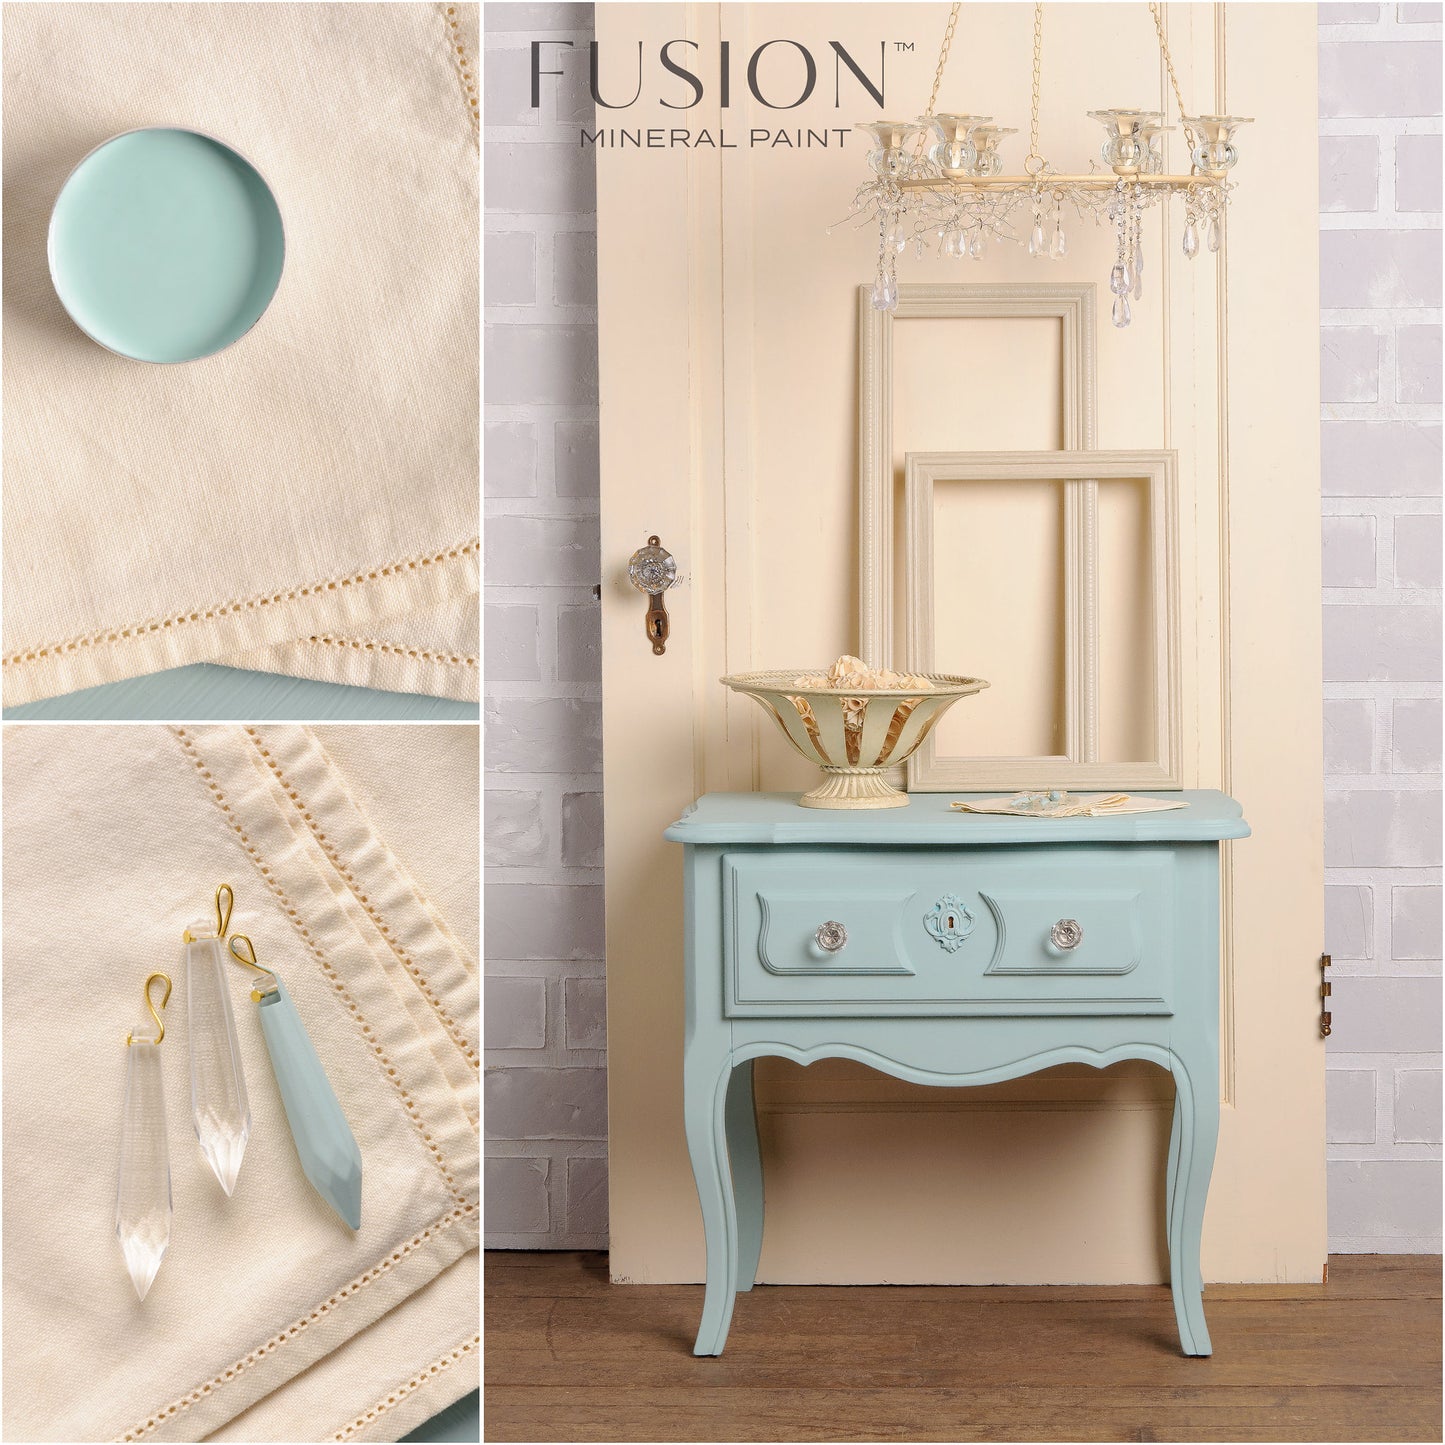 Inglenook - Fusion Mineral Paint Paint > Fusion Mineral Paint > Furniture Paint